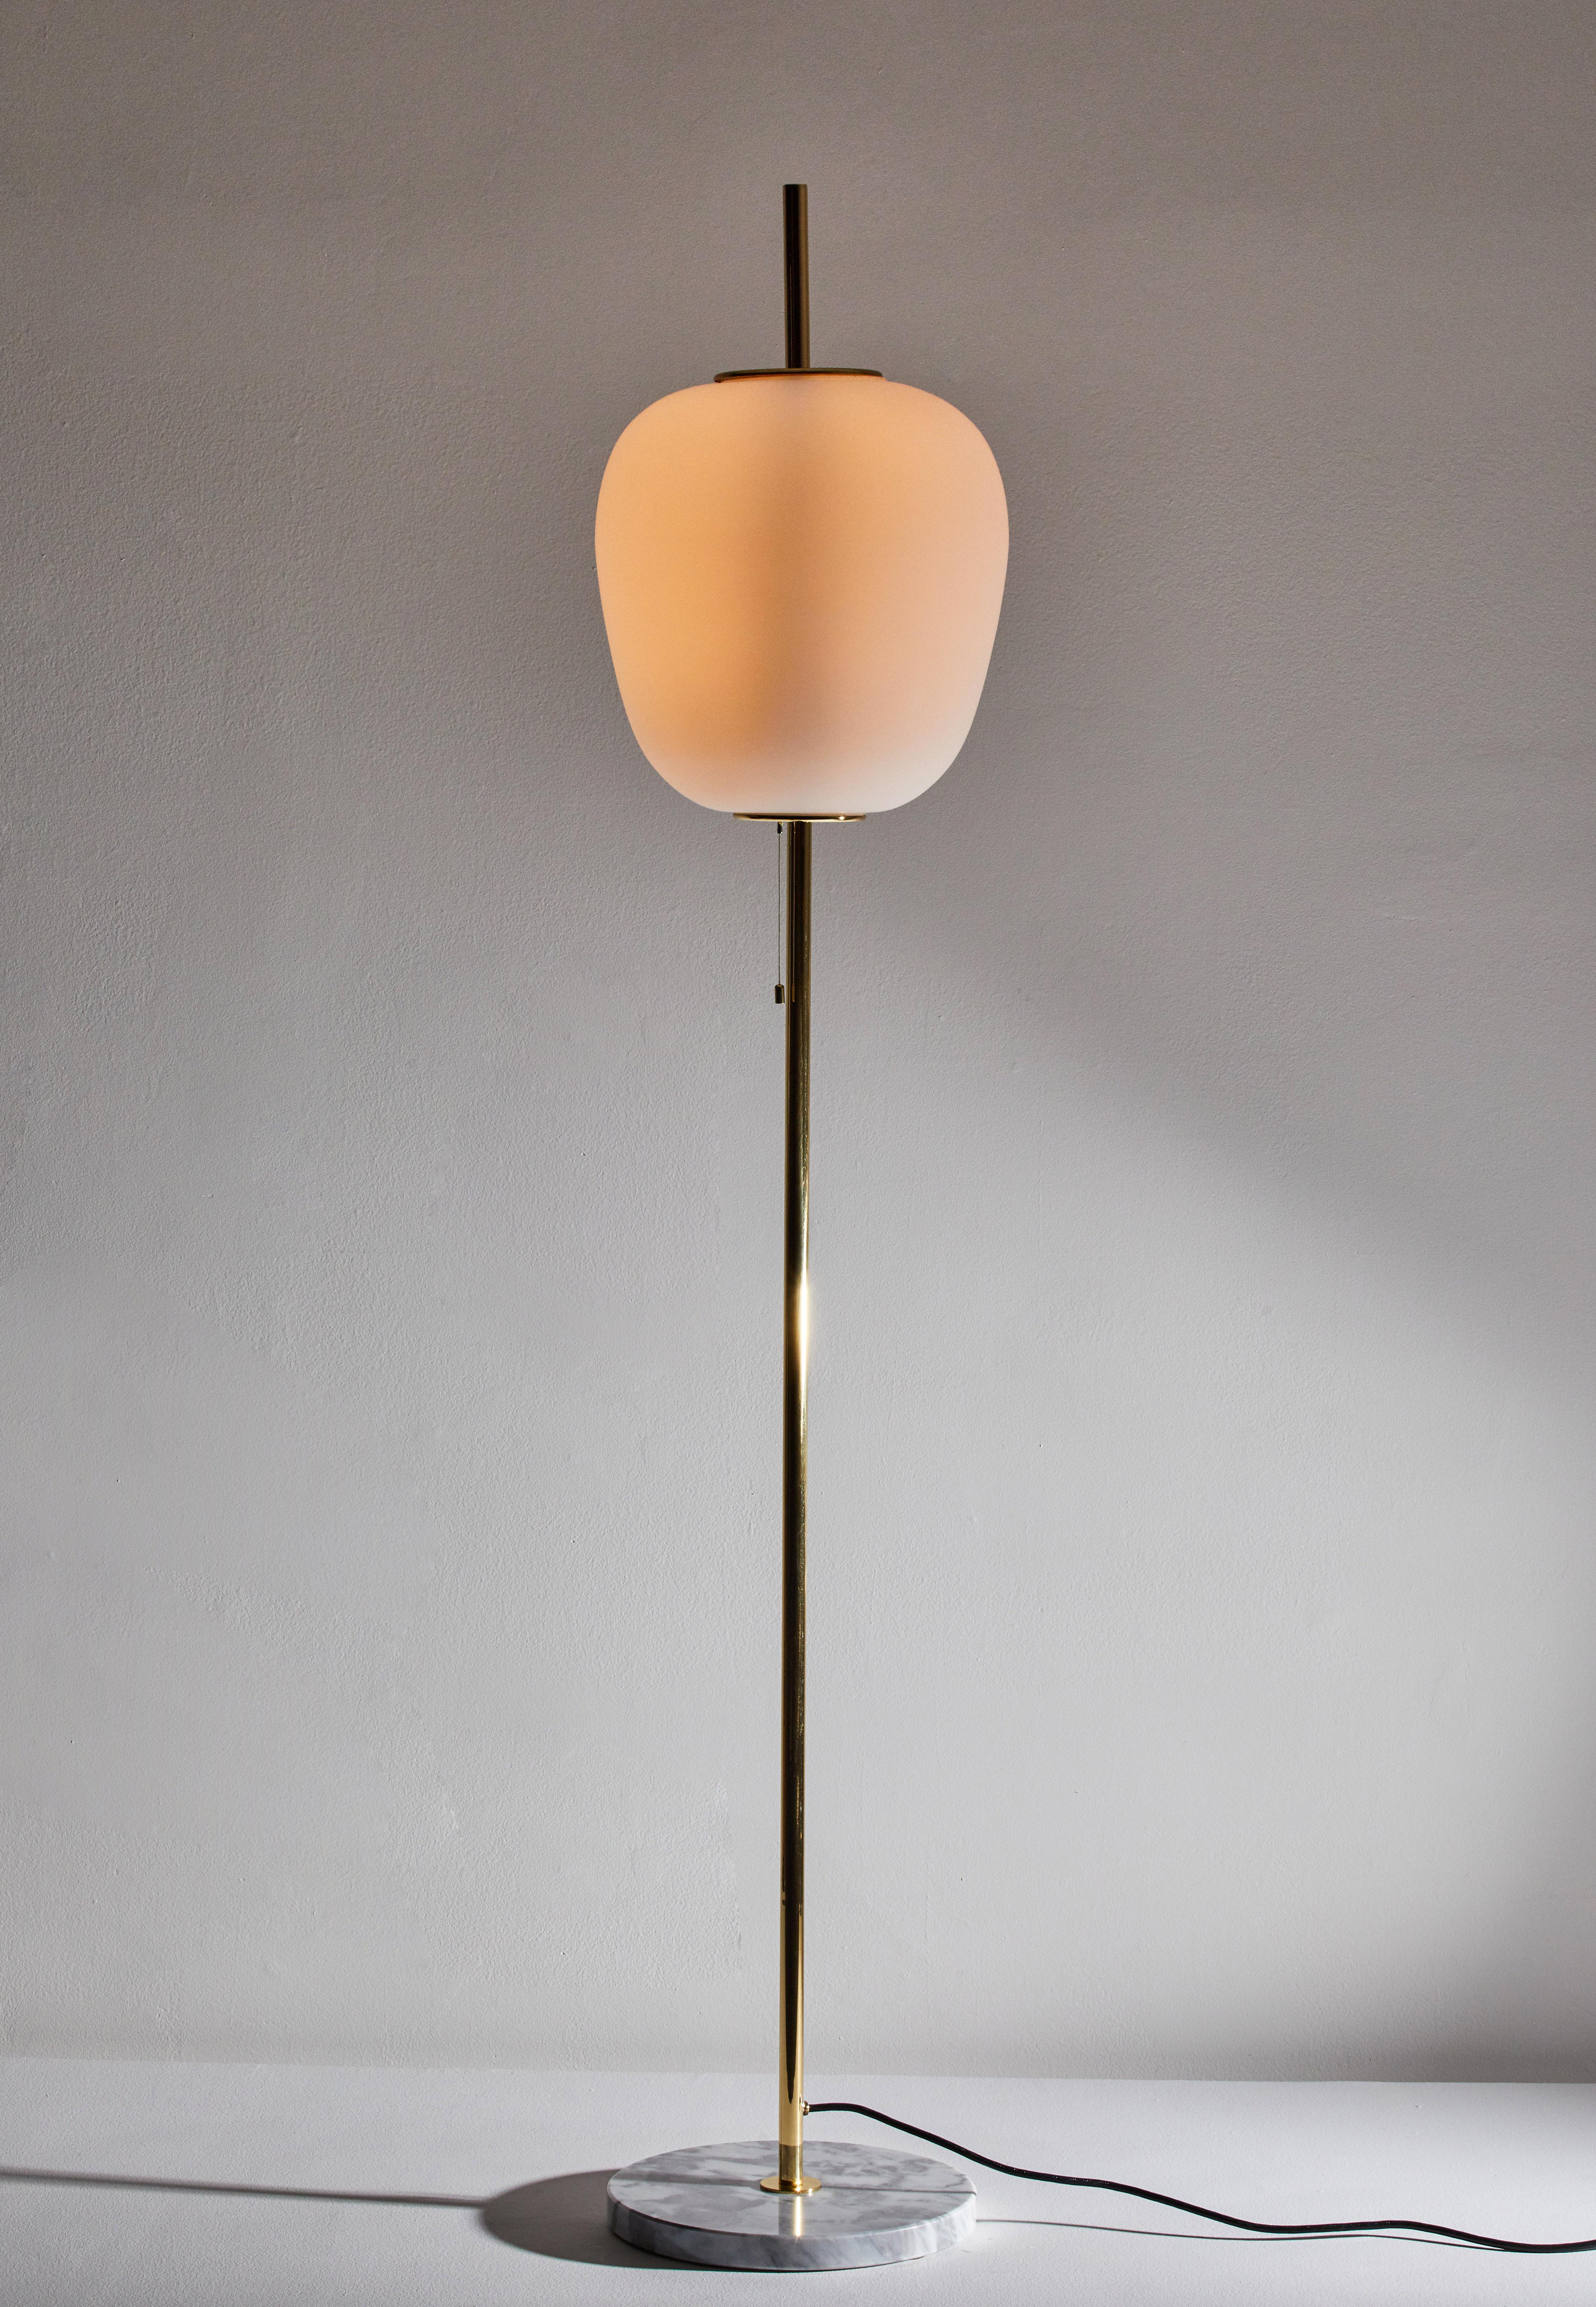 J14 floor lamp by Joseph-André Motte. Licensed, current production manufactured in France by Disderot. Brushed satin glass diffuser, brass stem with marble base. Numbered edition, delivered with authentication certificate. Wired for US. Takes one